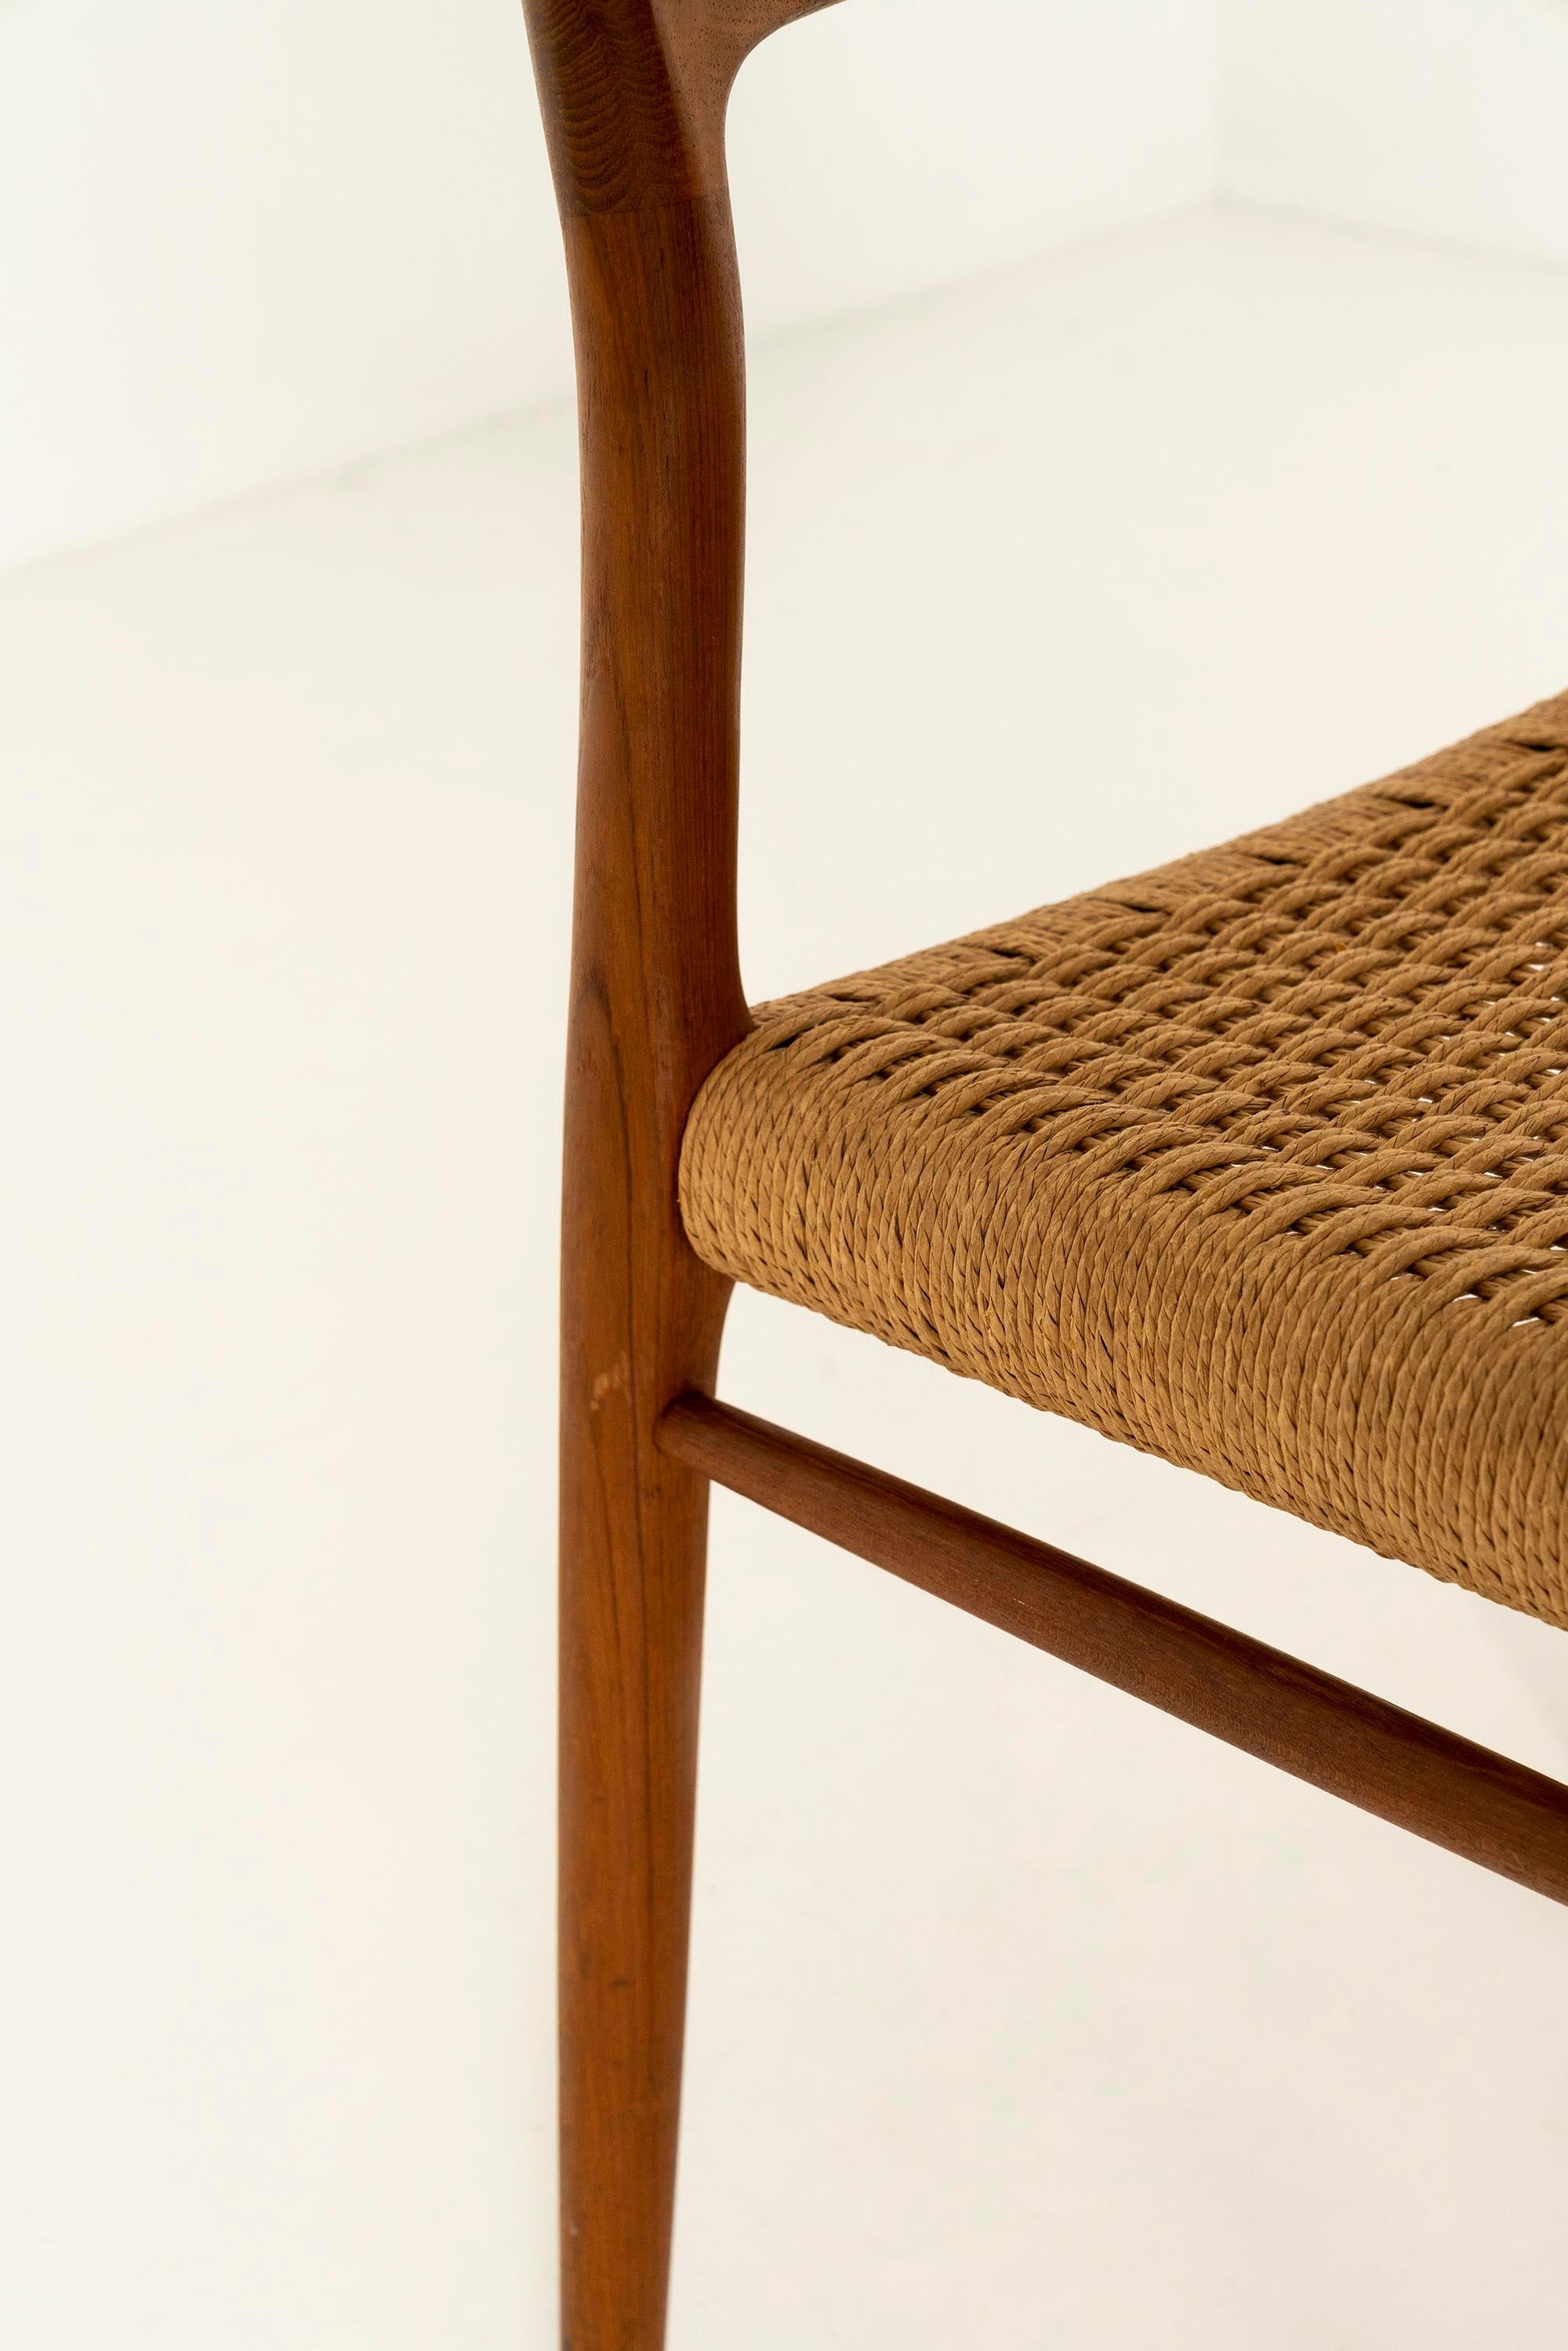 10 Niels Otto Møller 'Model 75' Chairs in Teak and Danish Paper Cord, 1960s For Sale 7